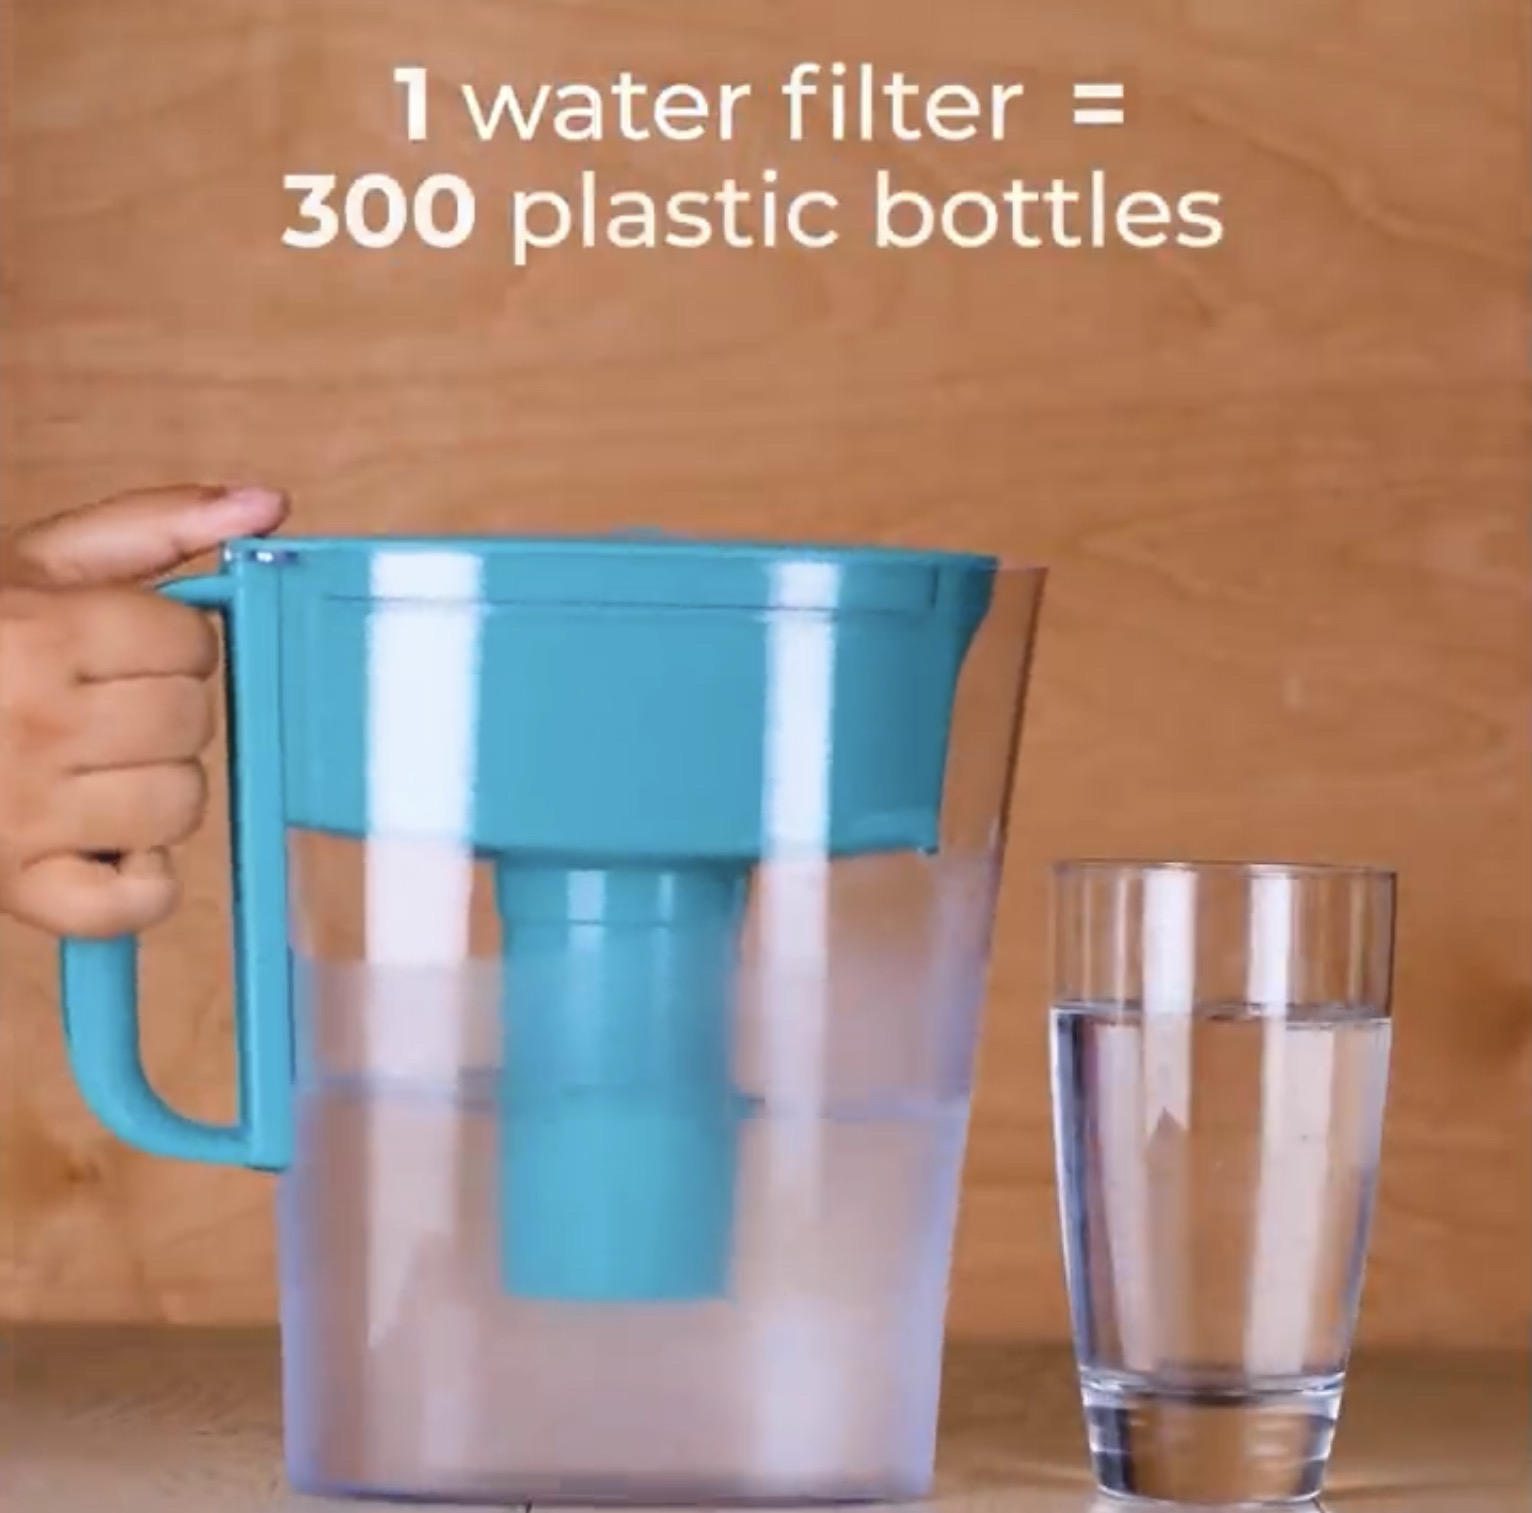 People spend hundreds (dollars, pounds, euros, you name it) on single-use “disposable” plastic bottles every year. Do yourself and the environment a favour and buy a water filter.